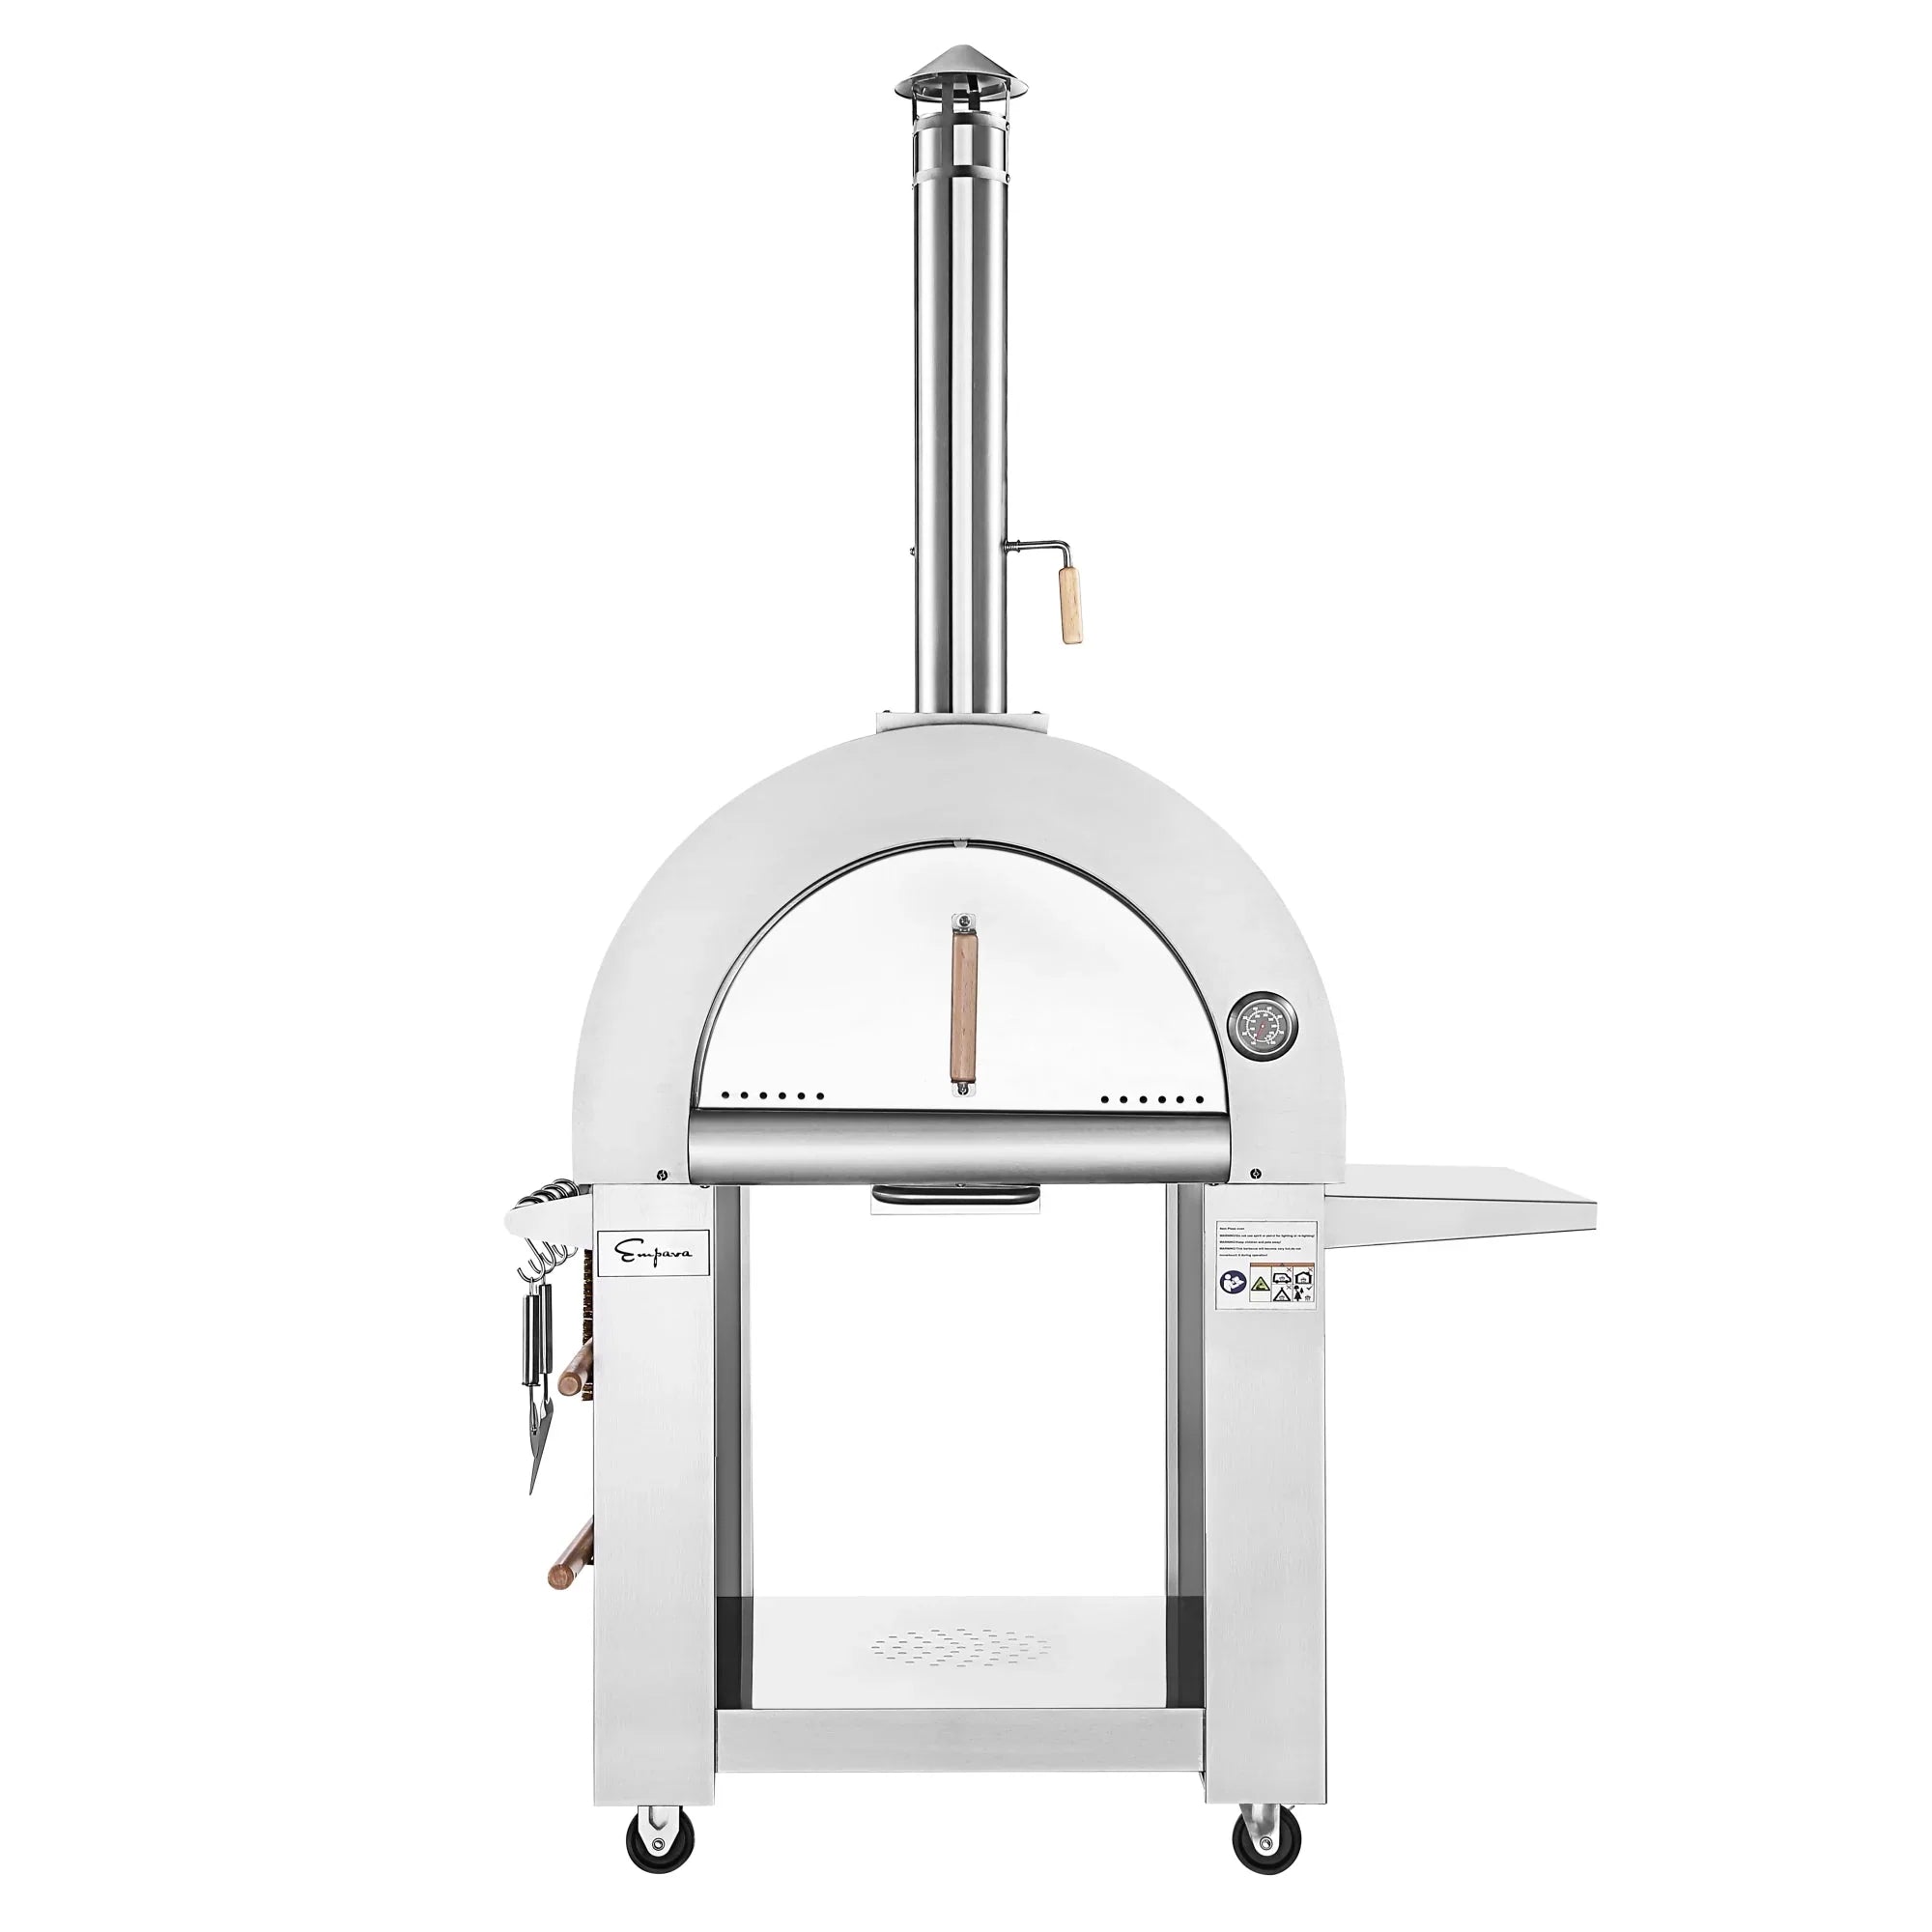 Empava Outdoor Wood Fired Pizza Oven in Stainless Steel with Collapsible Side Table (PG05) 